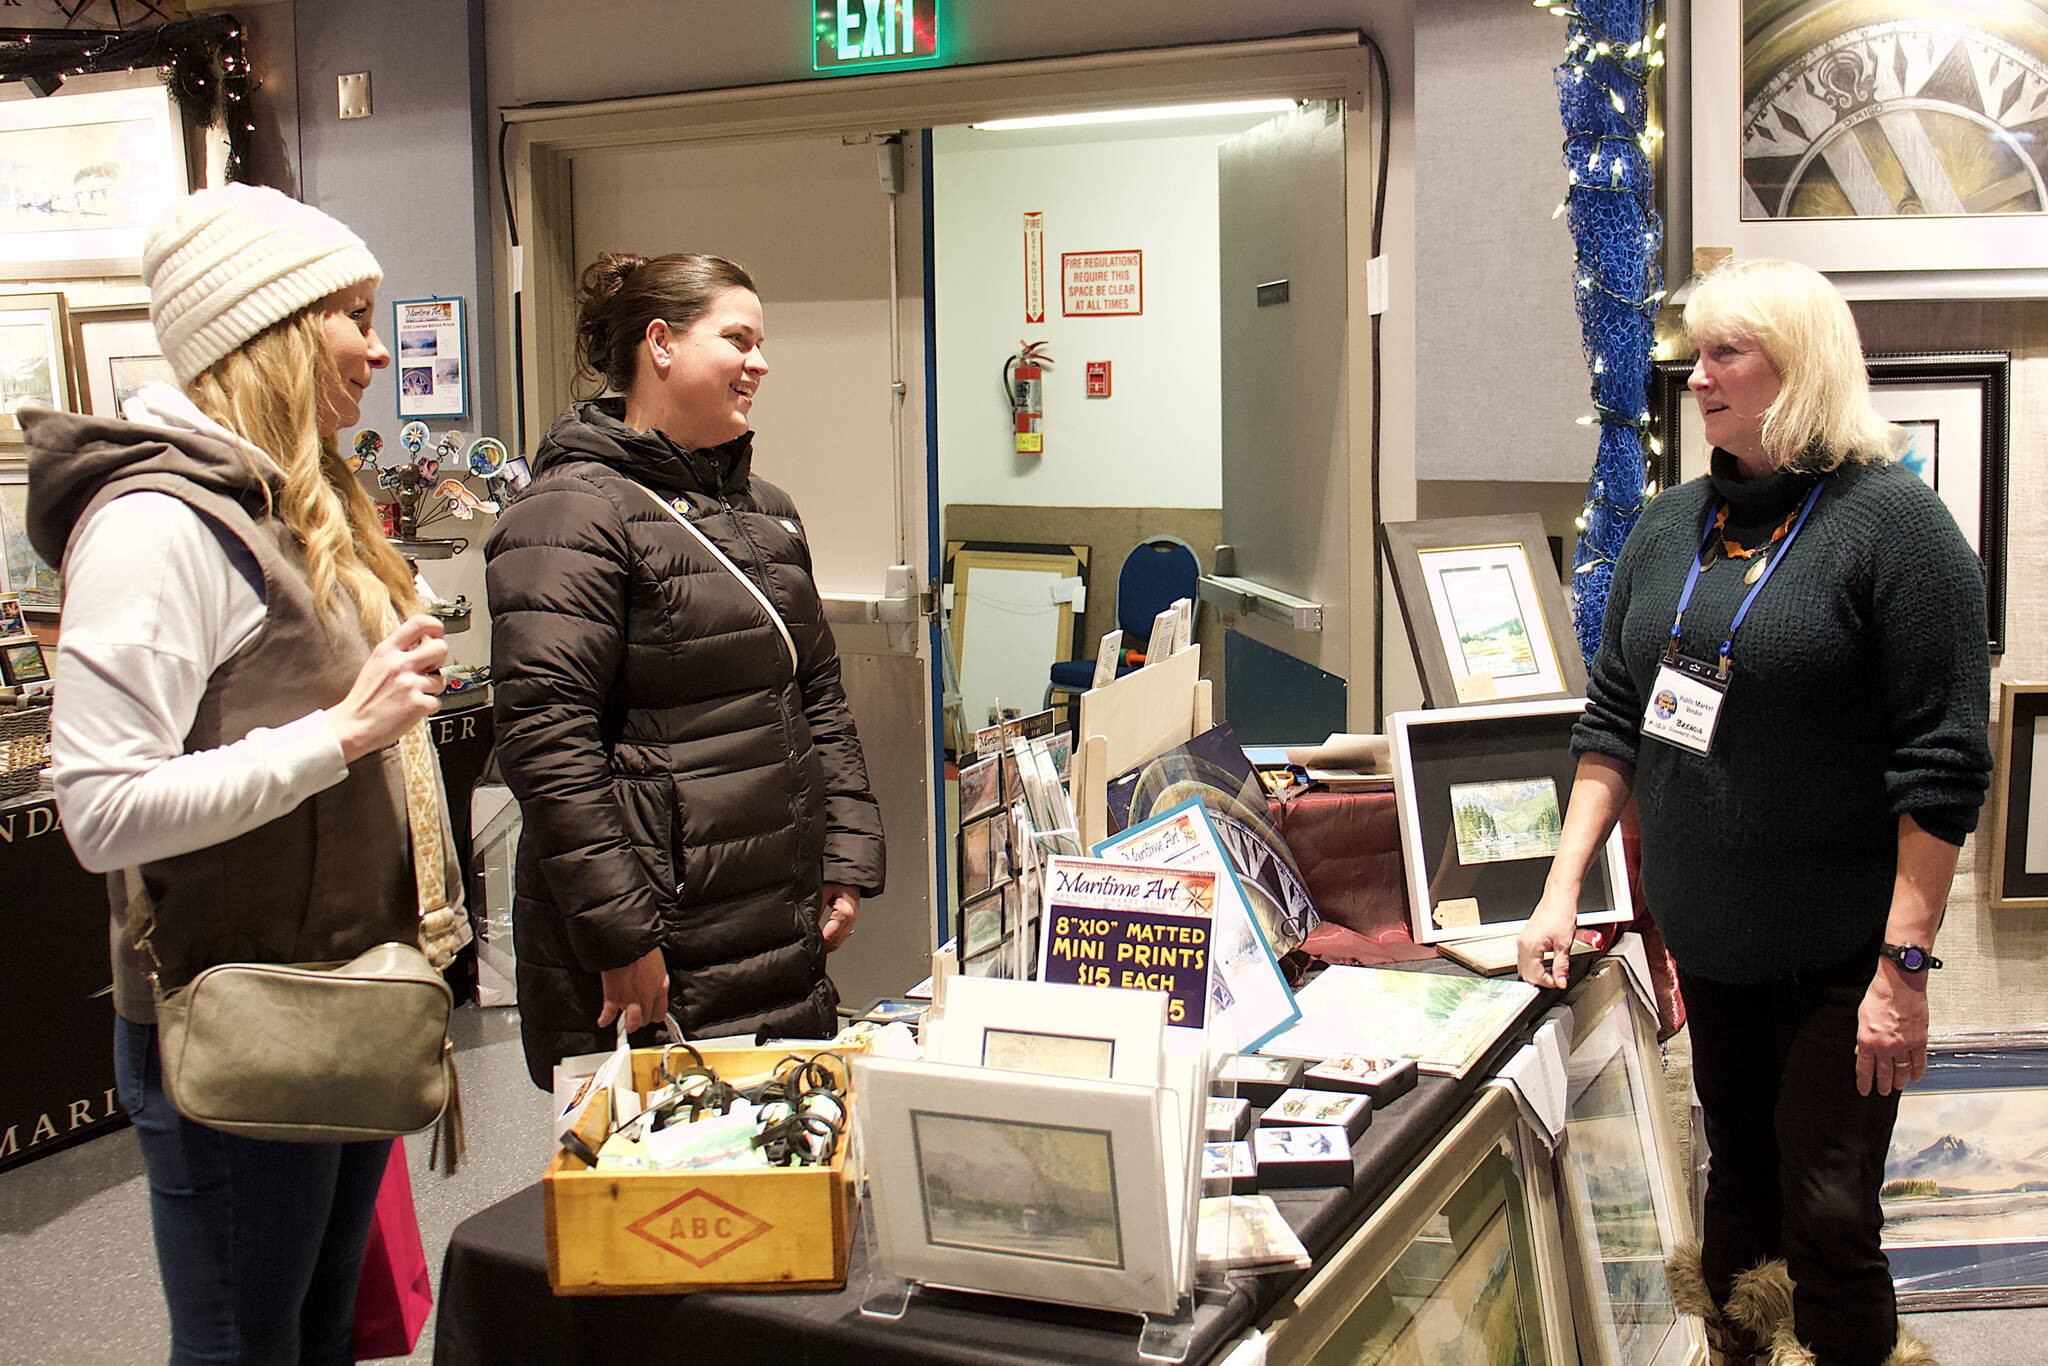 Brenda Schwartz-Yeager (right), a watercolor artist from Wrangell, discusses her works with Megan Griffin (left) and Lacey Sanders during the Juneau Public Market at Centennial Hall on Saturday. (Mark Sabbatini / Juneau Empire)